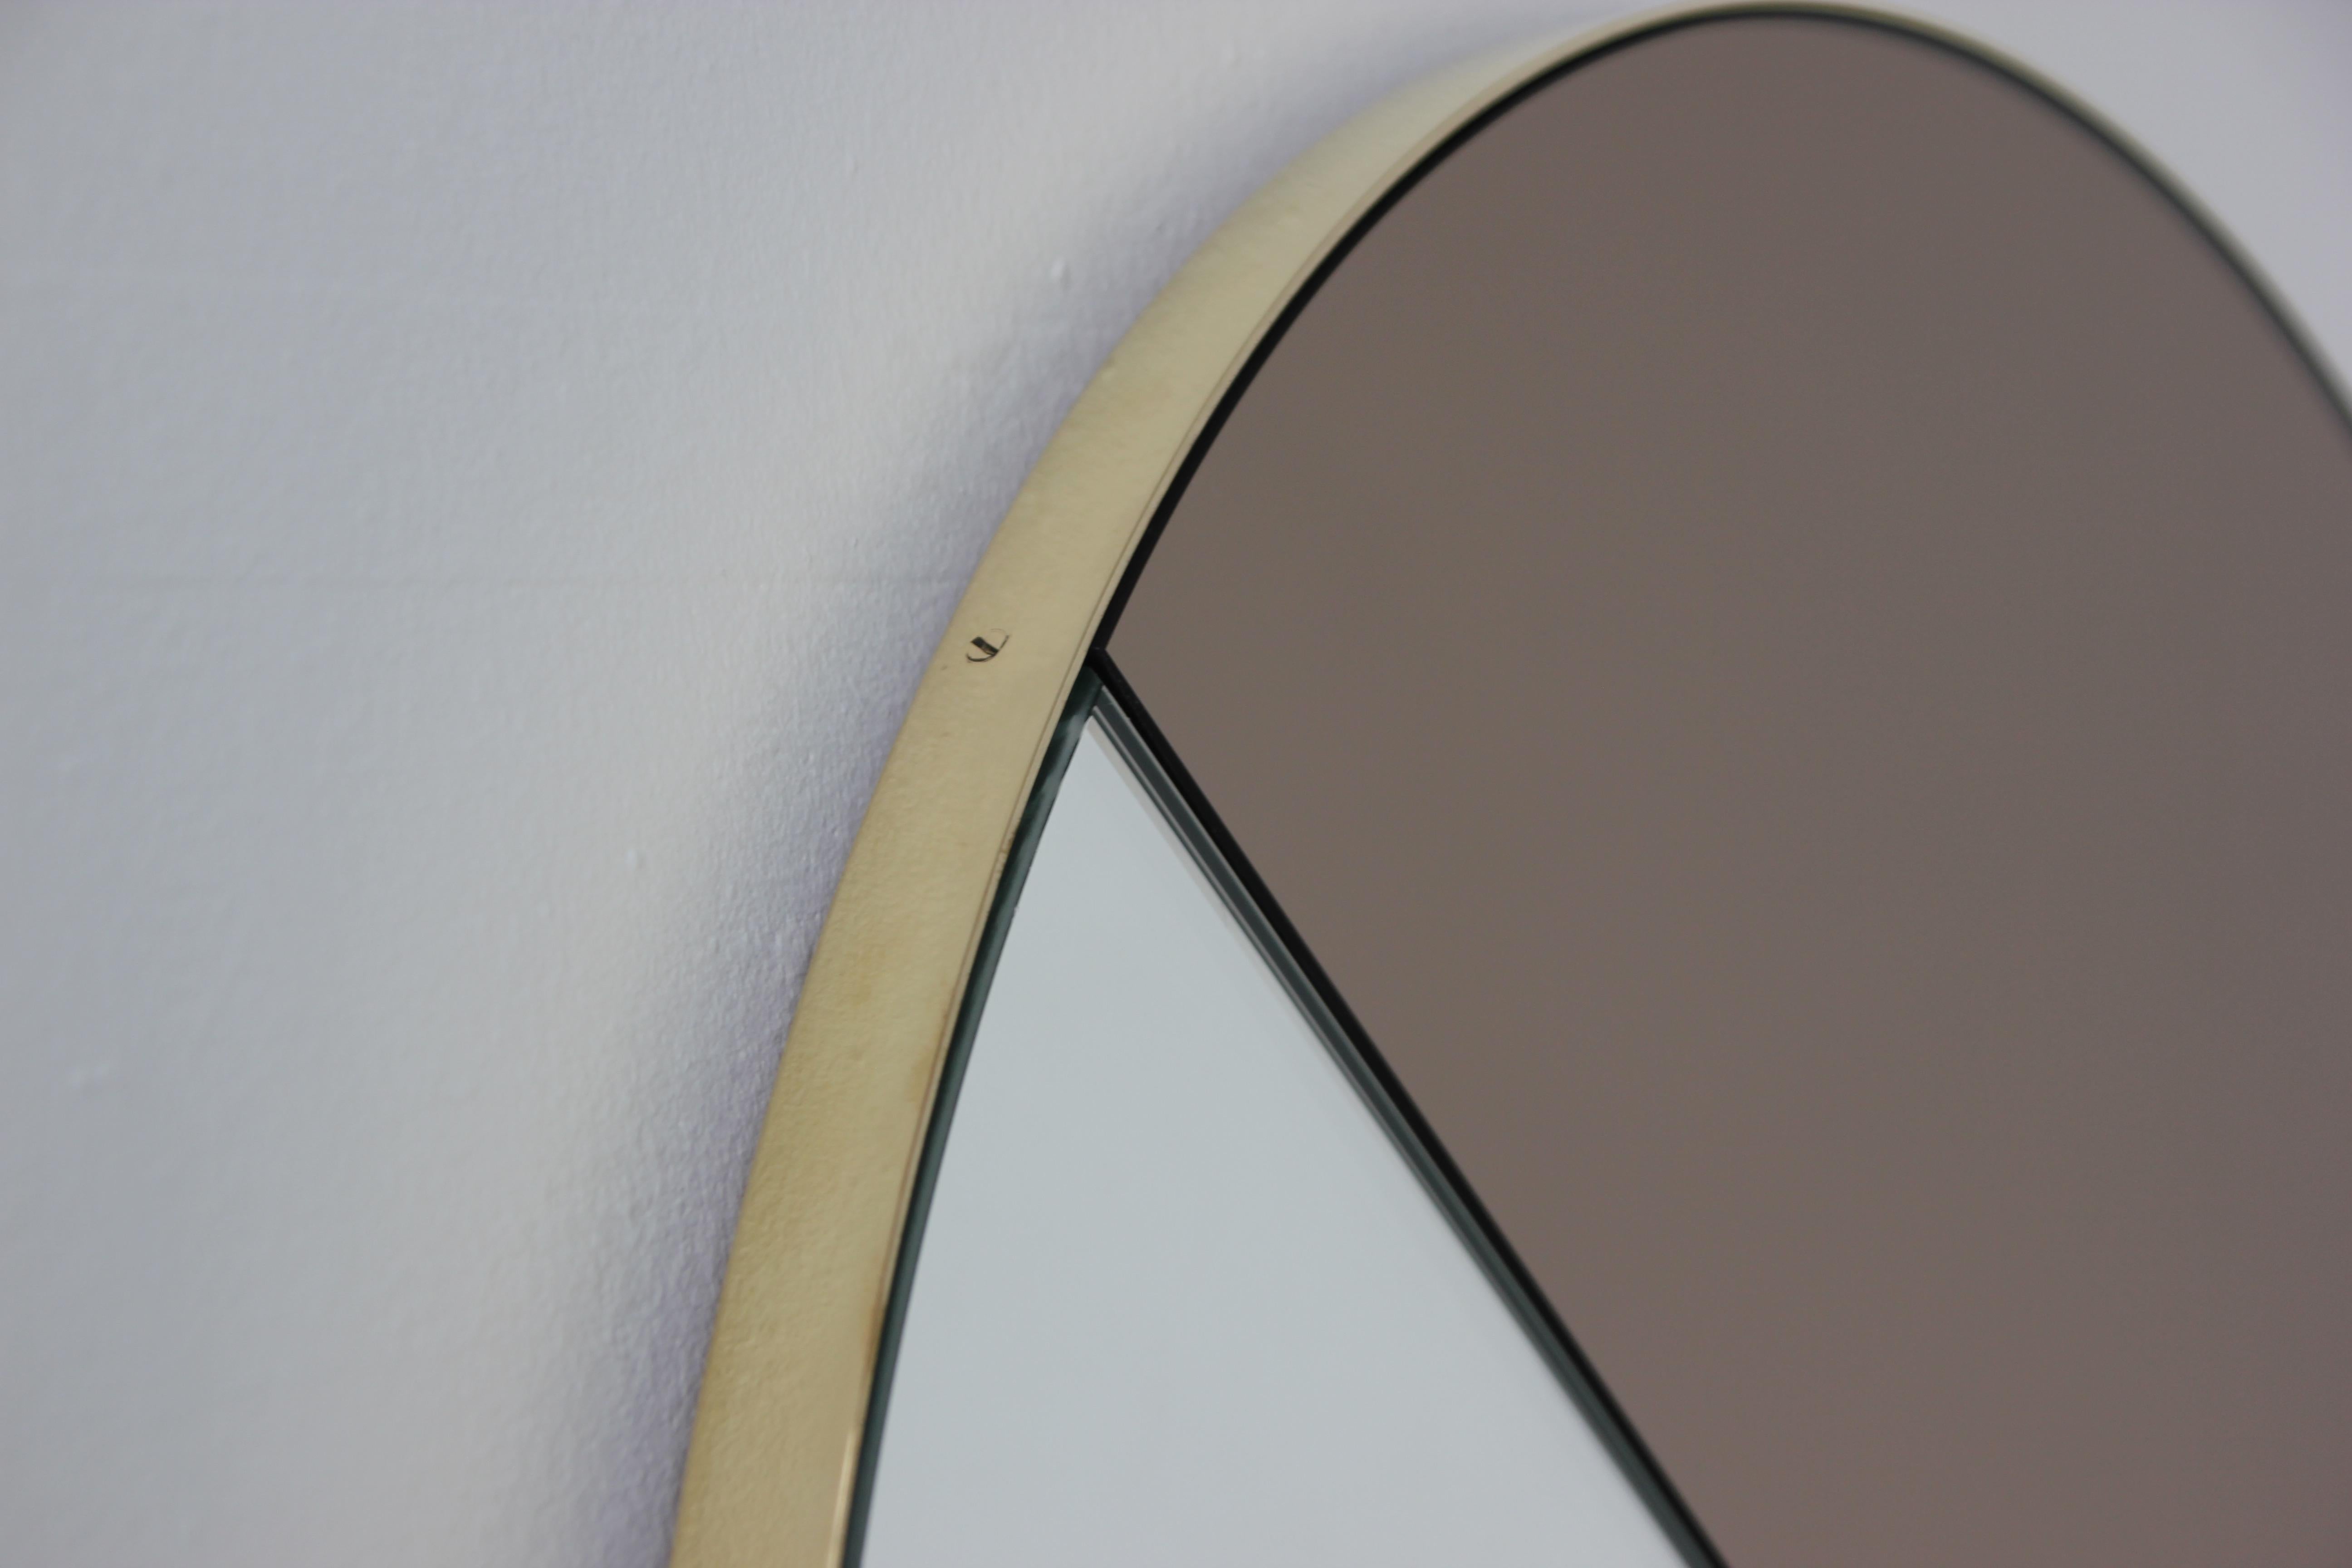 Contemporary mixed tinted bronze and silver Orbis Dualis™ mirror with an elegant solid brushed brass frame.  Fitted with a quality and ingenious hanging system for a flexible installation in 6 different positions (see pictures for reference).